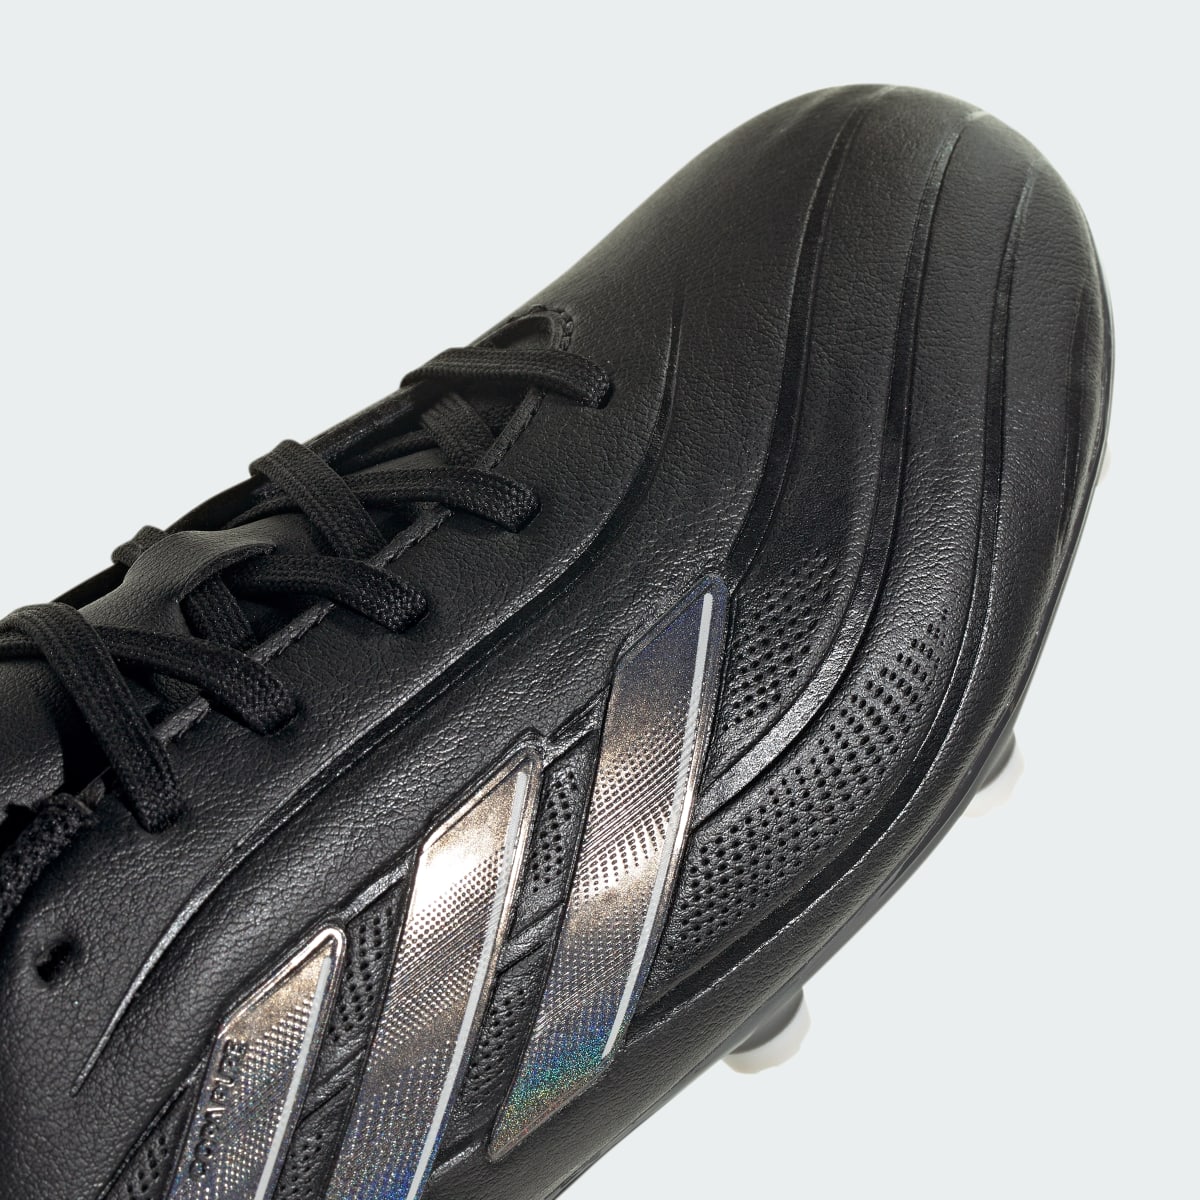 Adidas Copa Pure II League Firm Ground Boots. 9